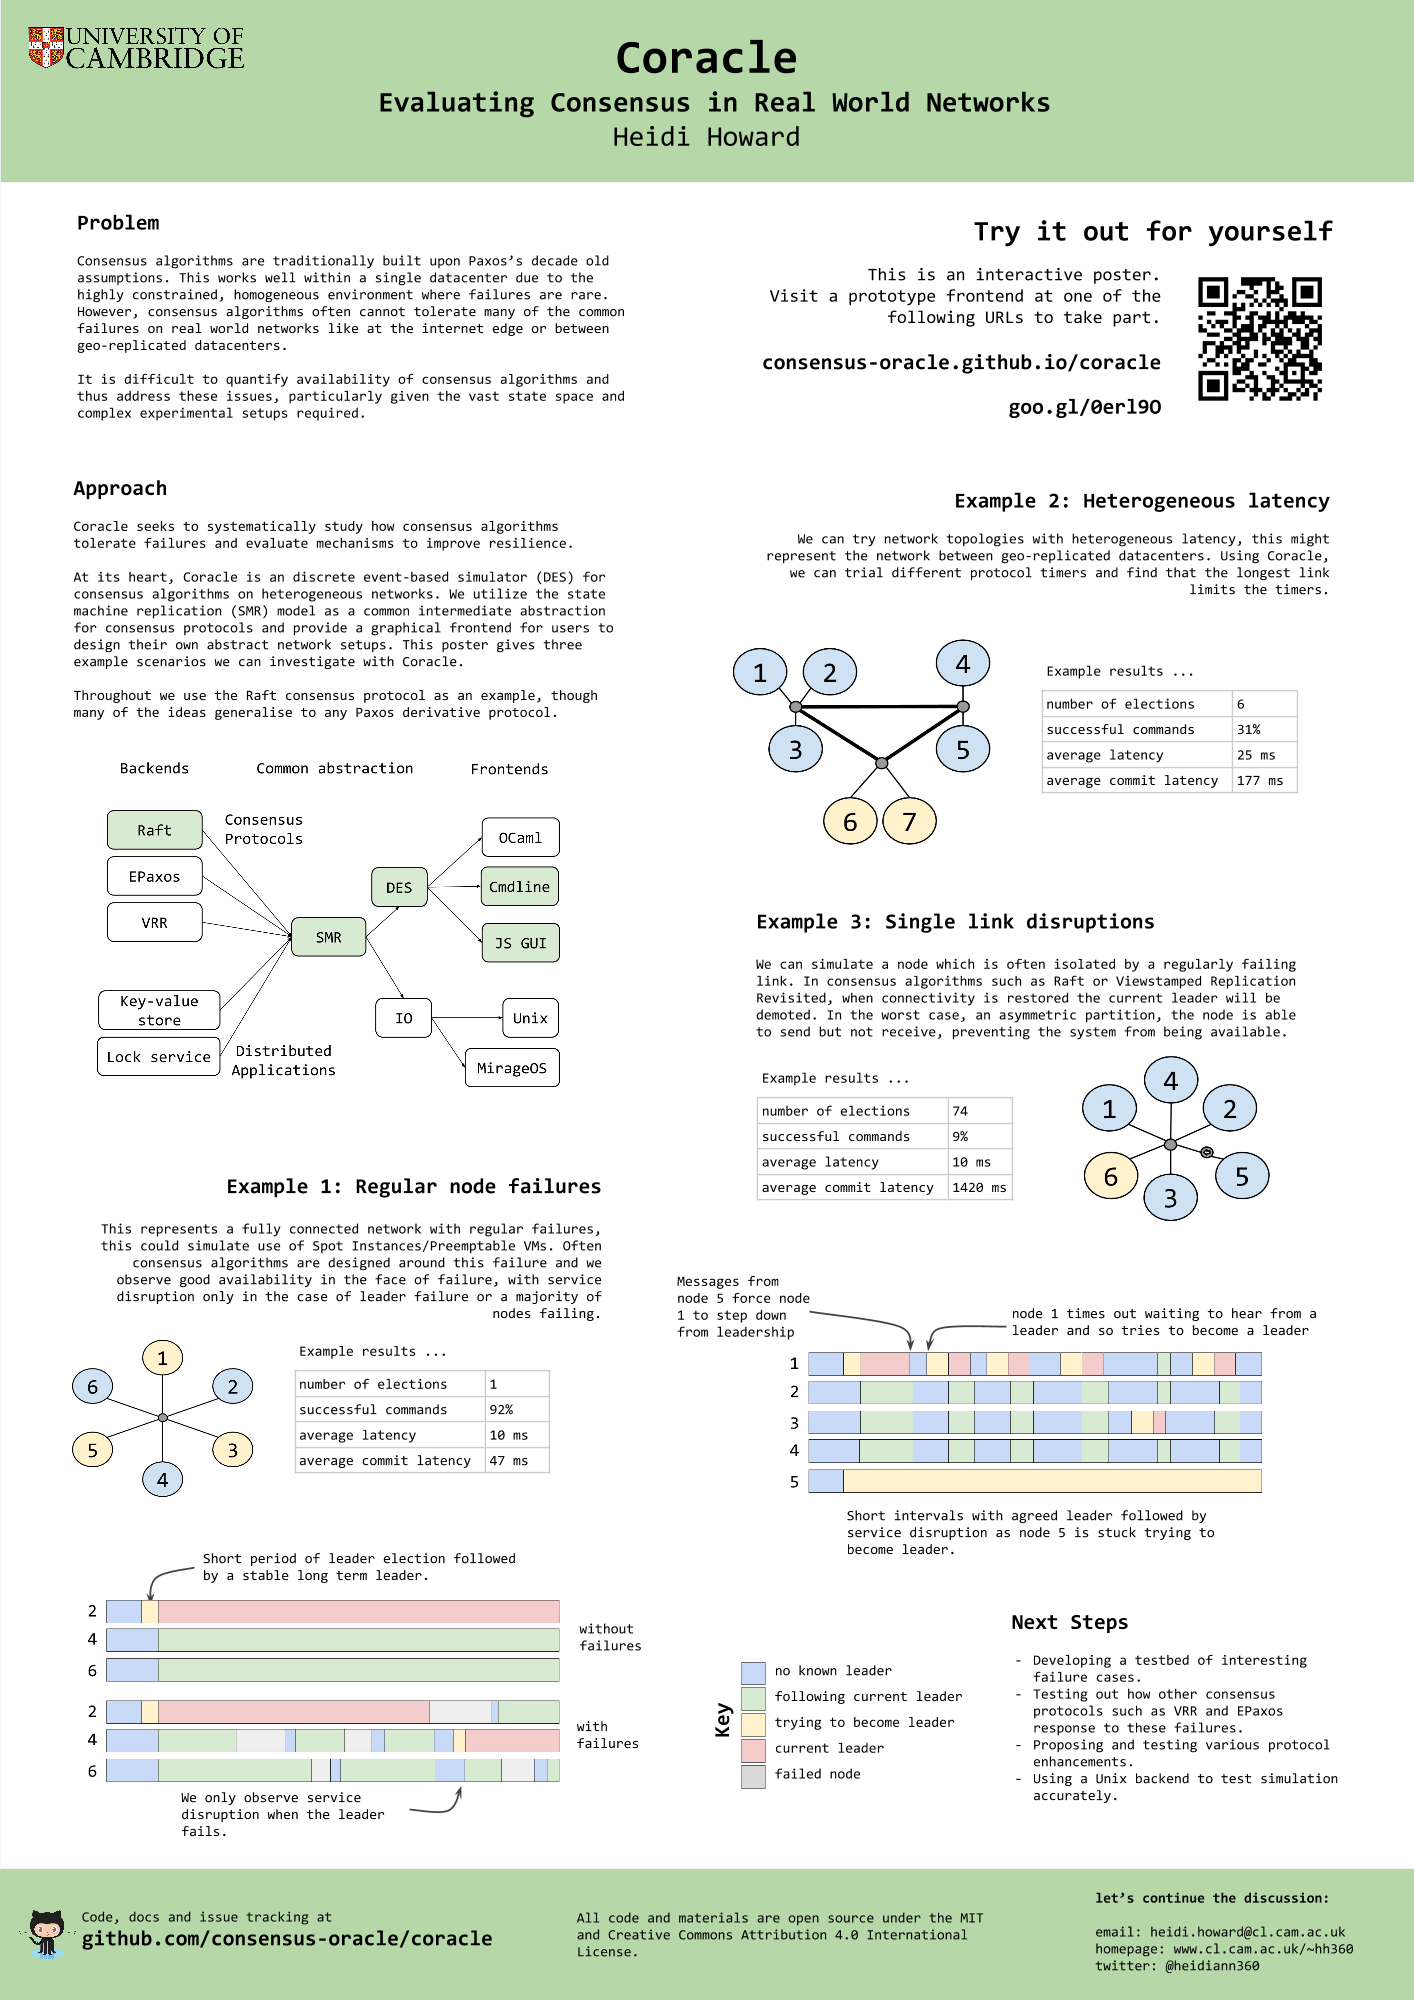 SIGCOMM'15 Poster